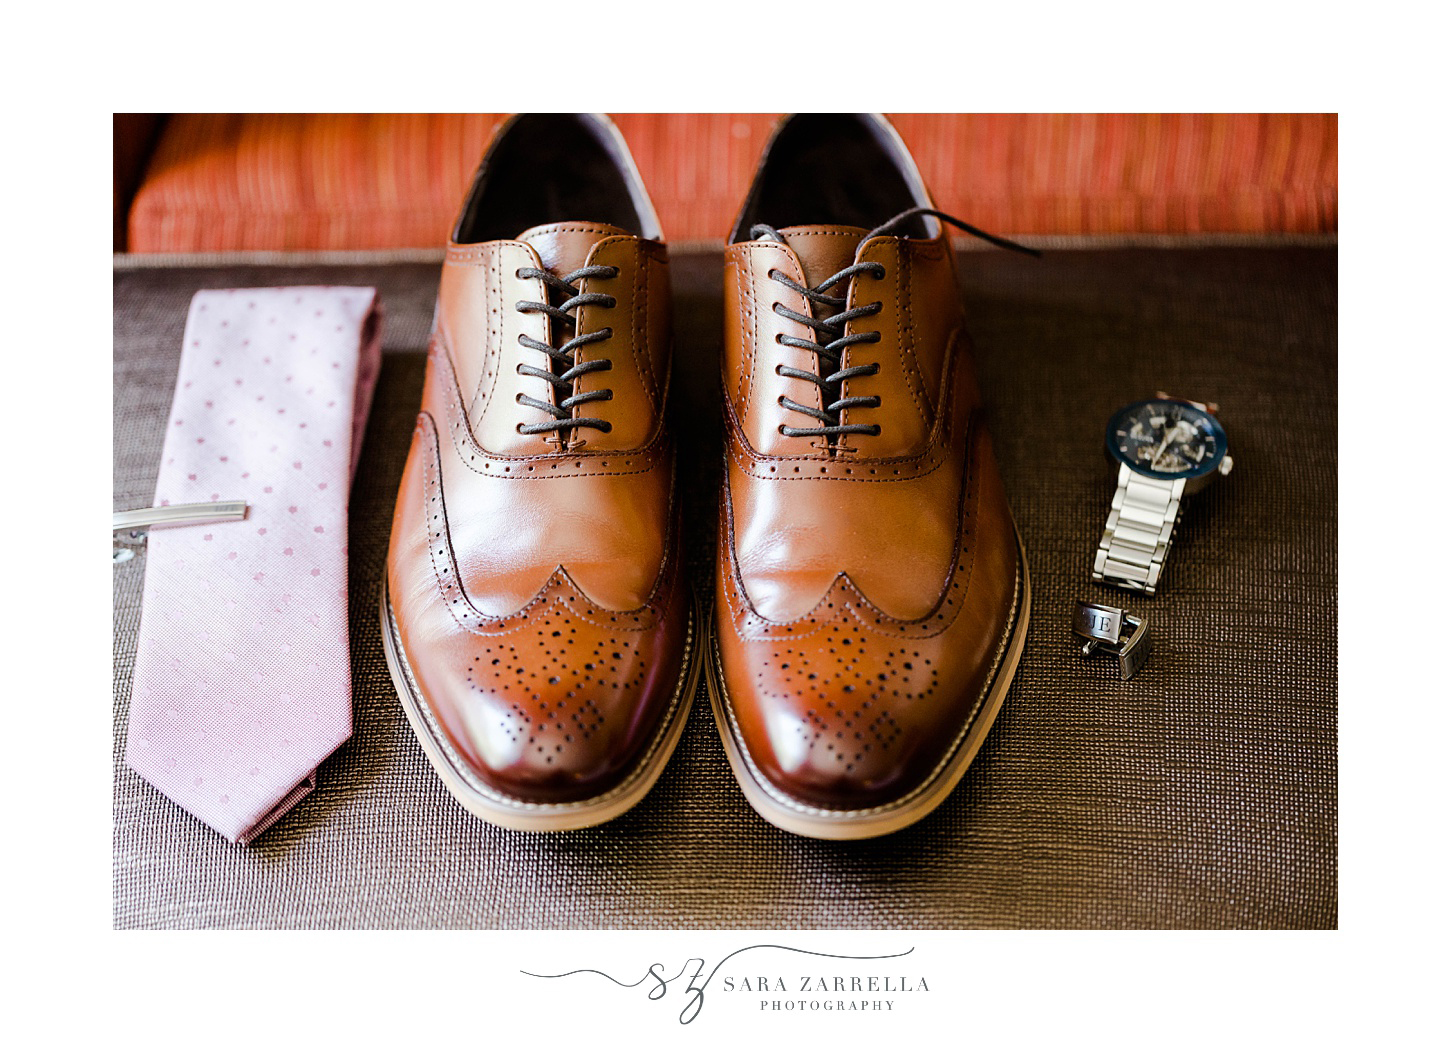 groom's brown shoes and pink tie for spring wedding in Rhode Island